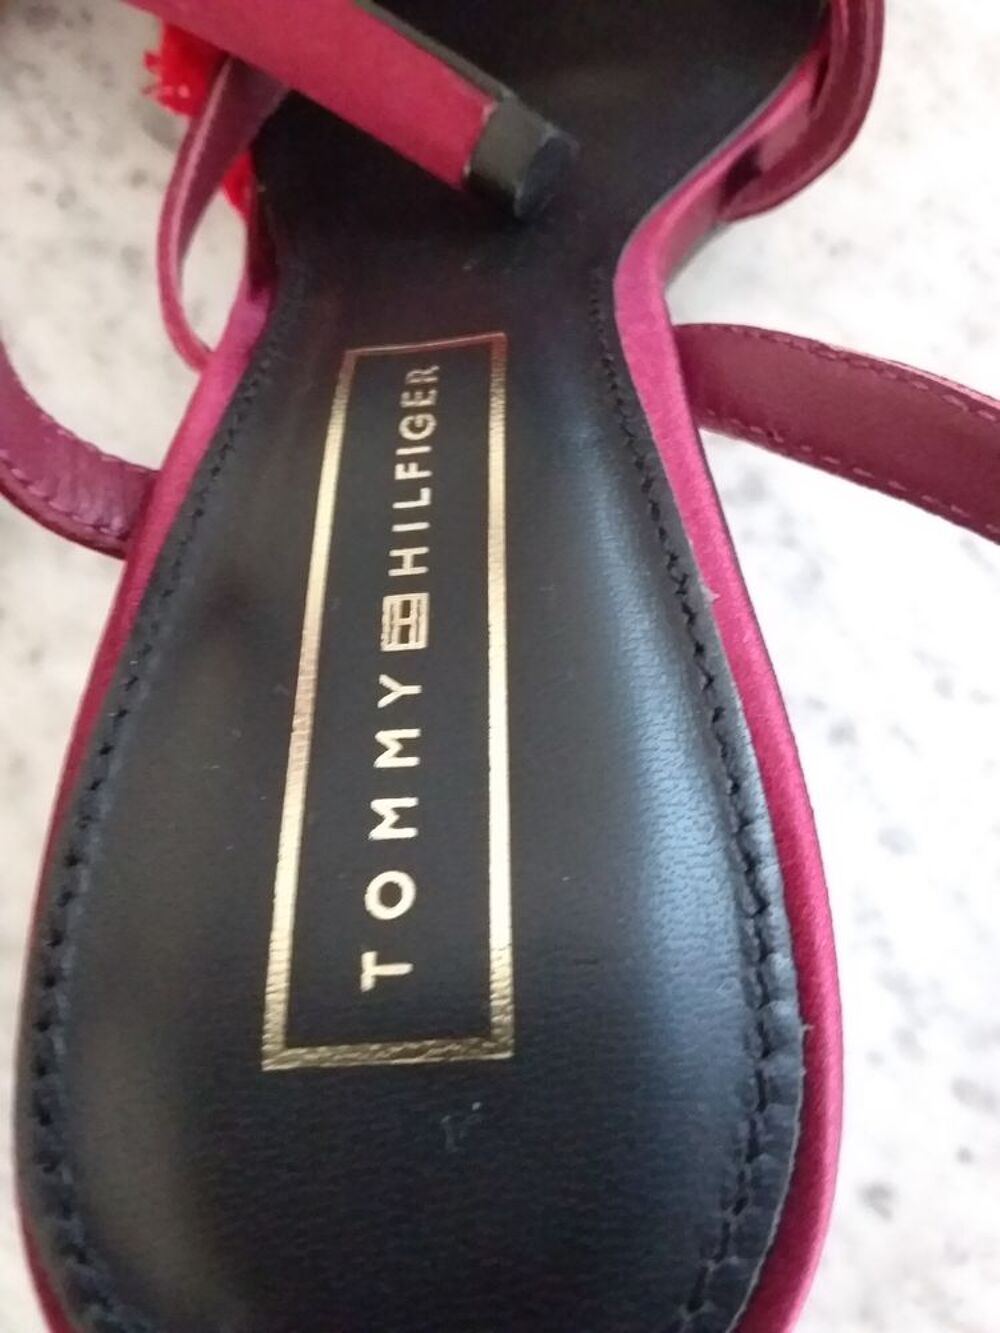 TOMMY HILFIGER PAIRE ROUGE POINTURE 38
50 EUROS Chaussures